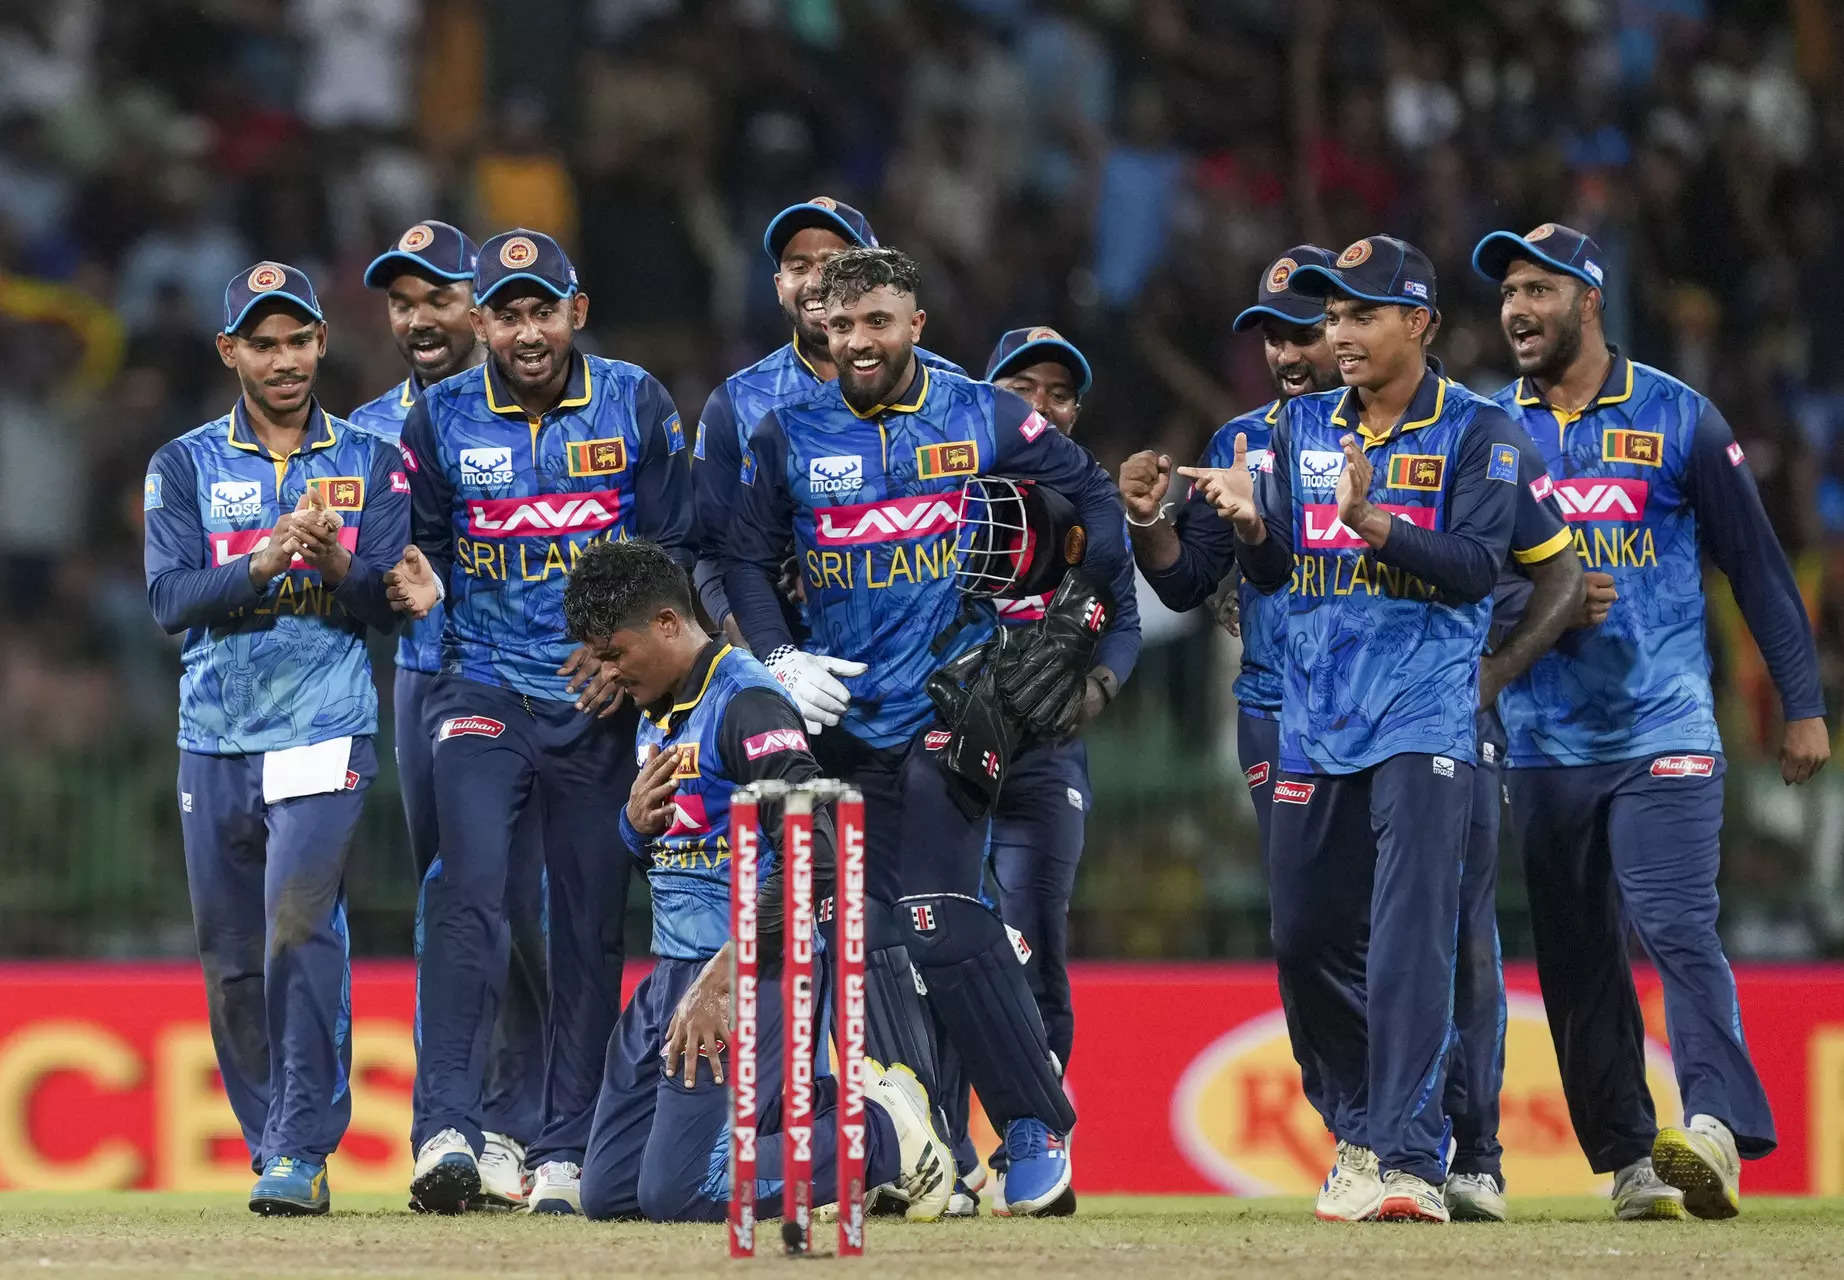 Vandersay heroics help Sri Lanka bowl India out for 208 in second ODI to win by 32 runs 